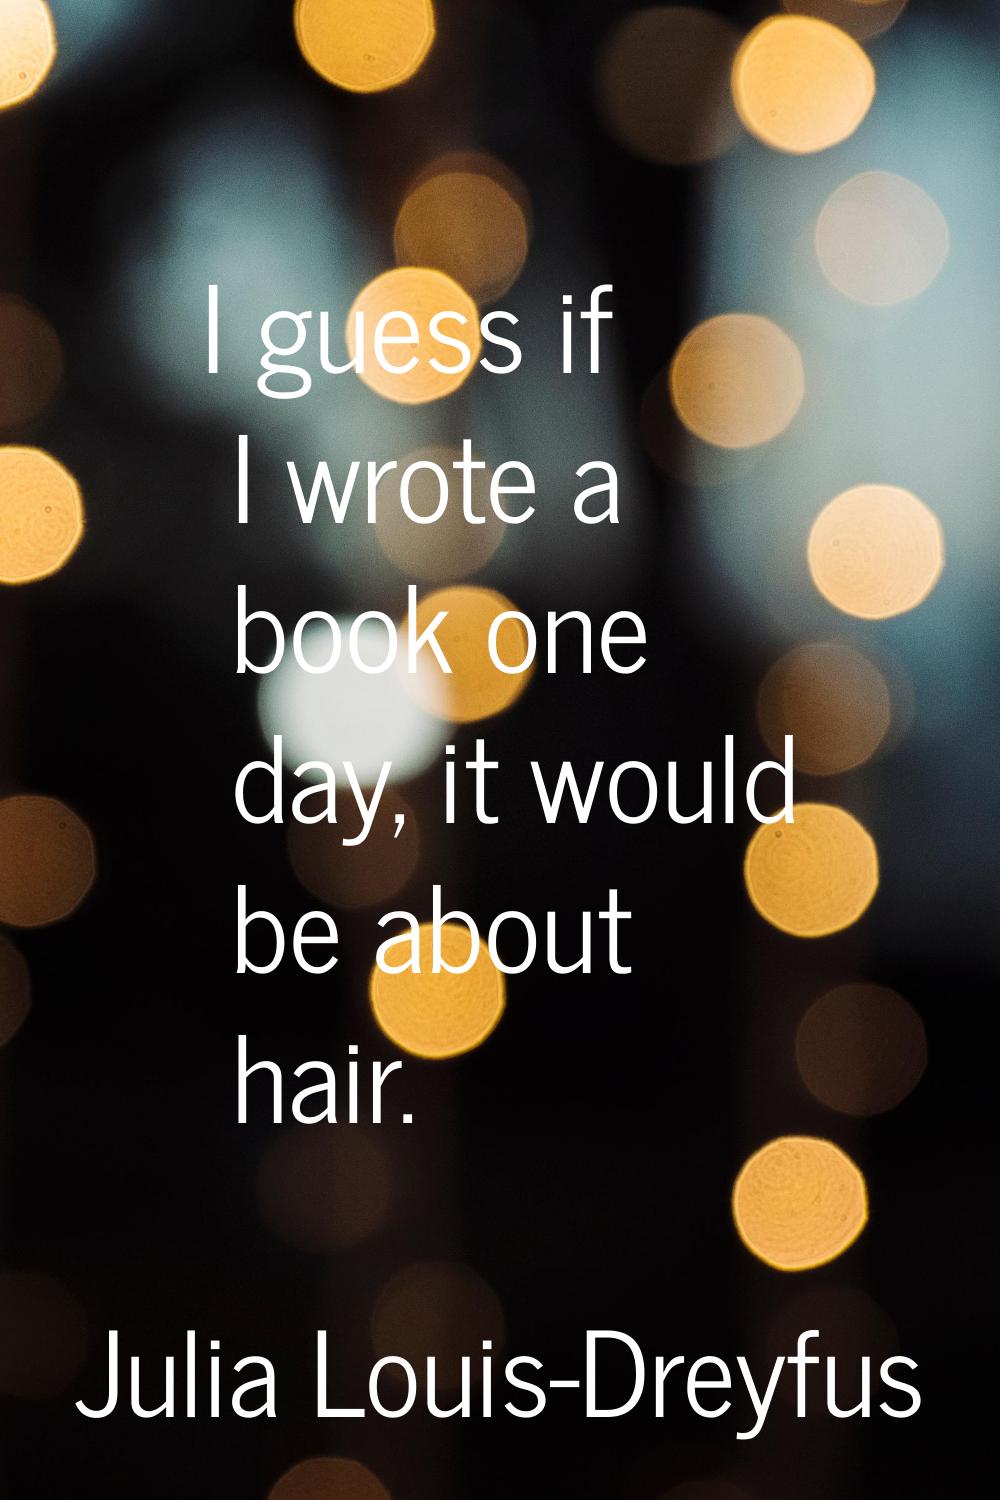 I guess if I wrote a book one day, it would be about hair.